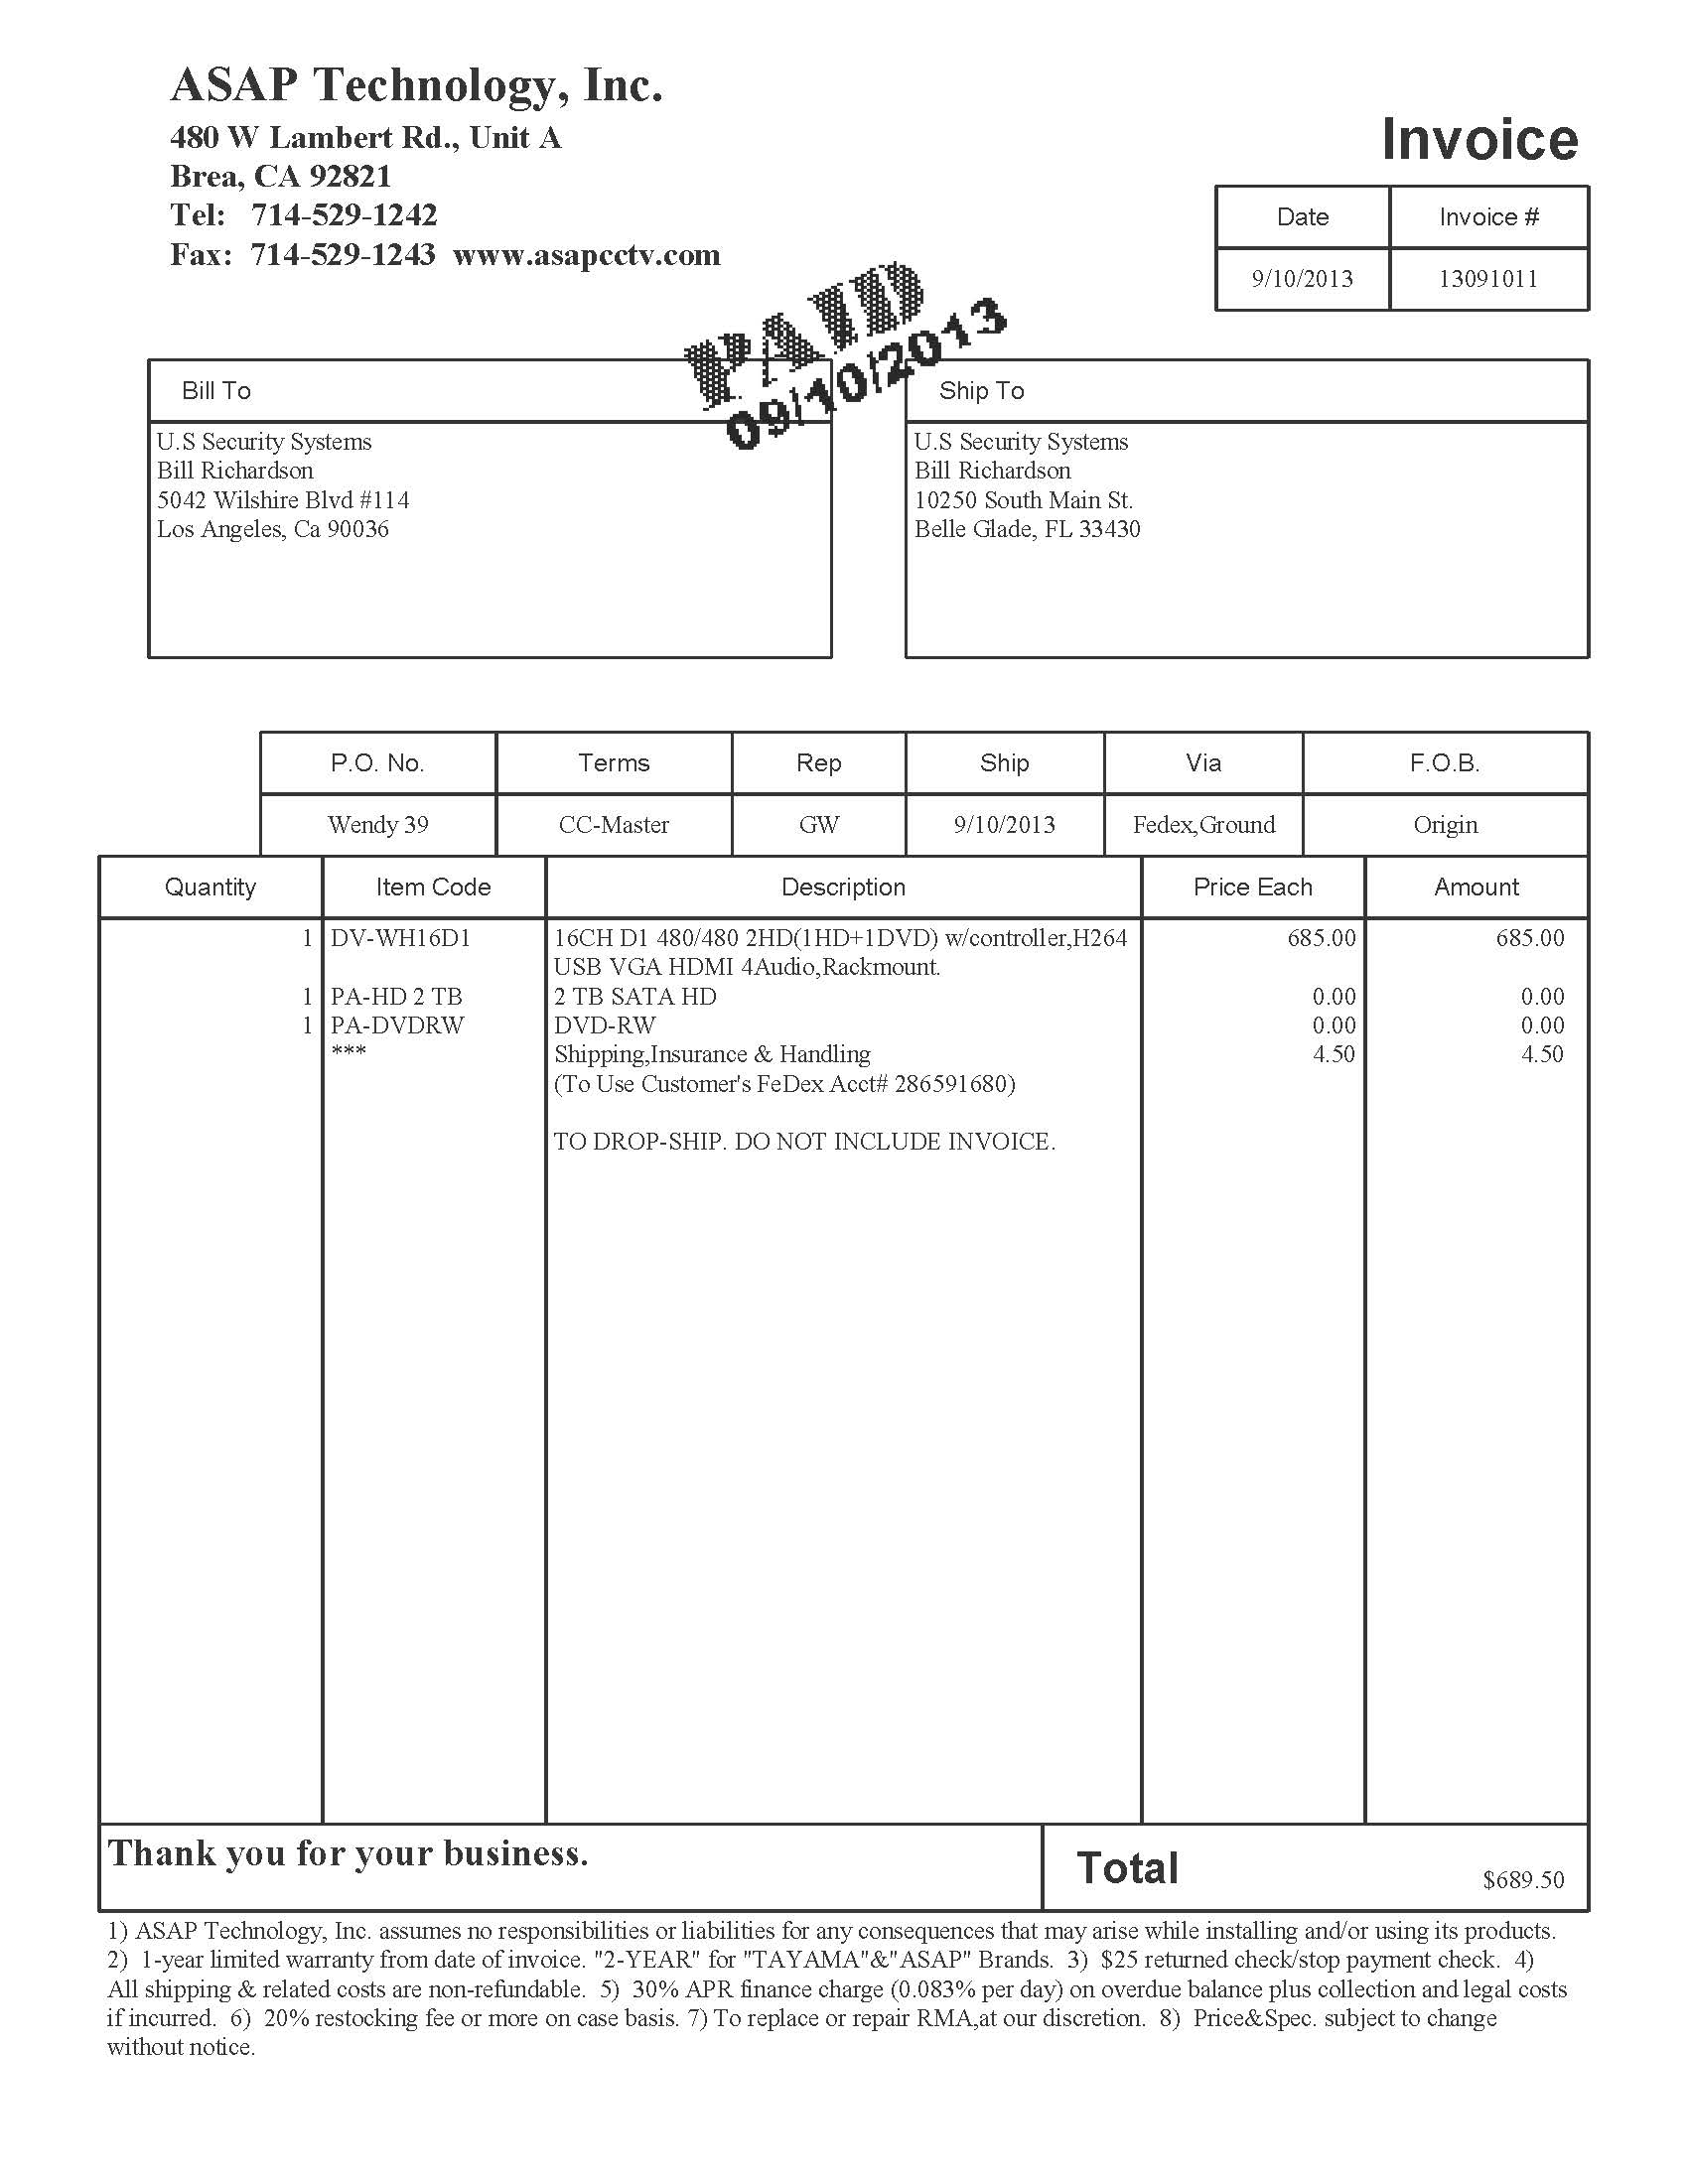 Invoice showing the wrong DVR was shipped